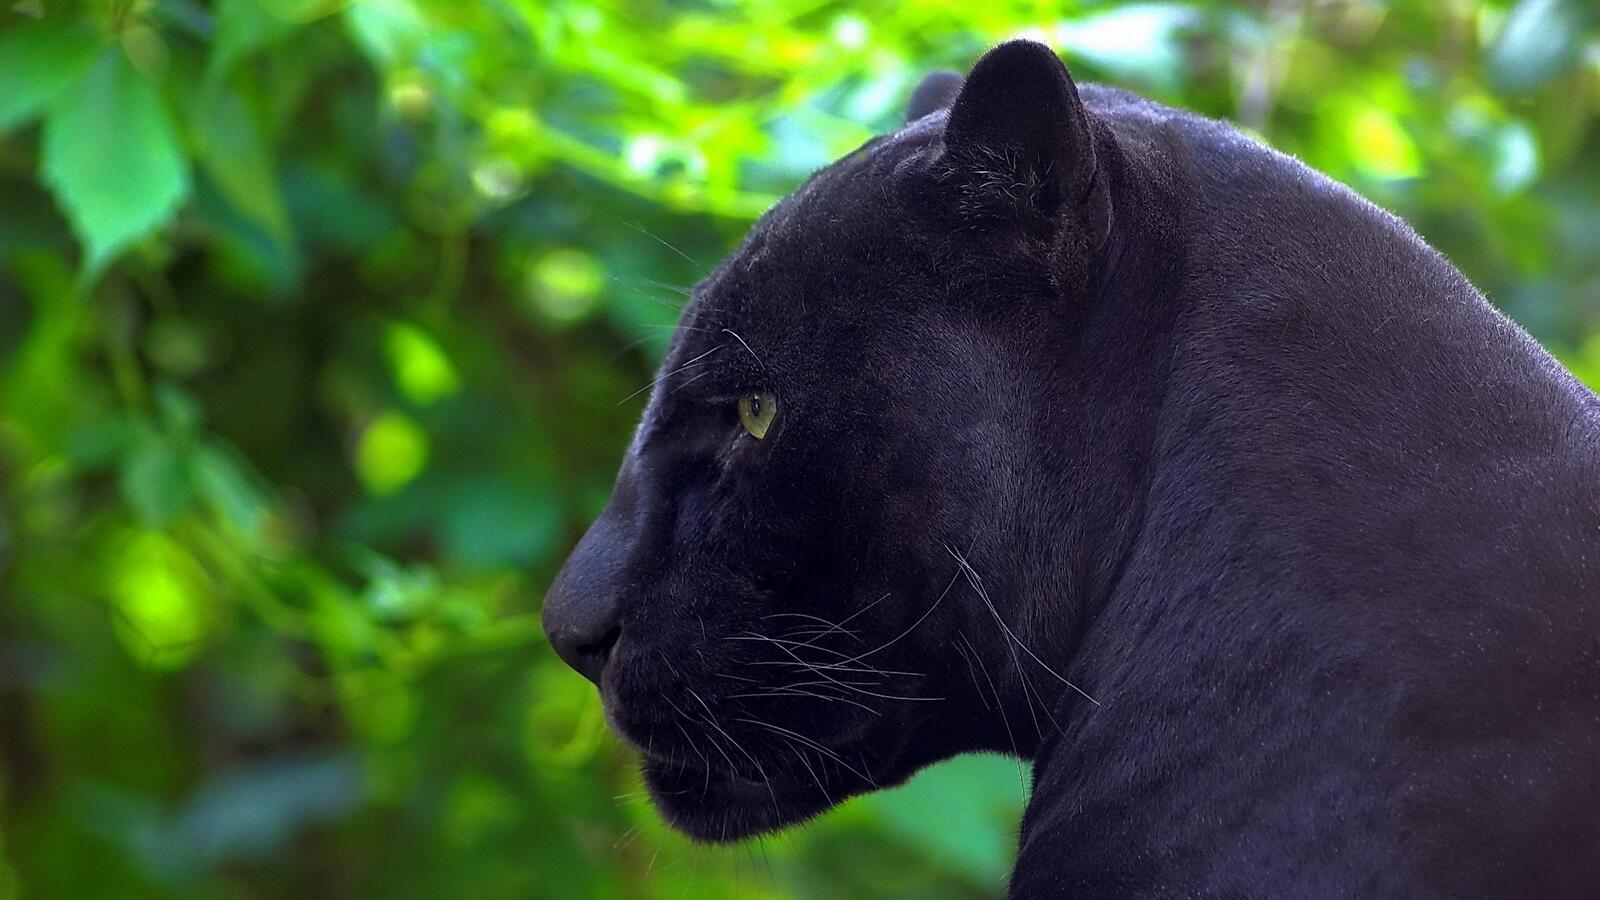 Wallpapers panther beast wild on the desktop